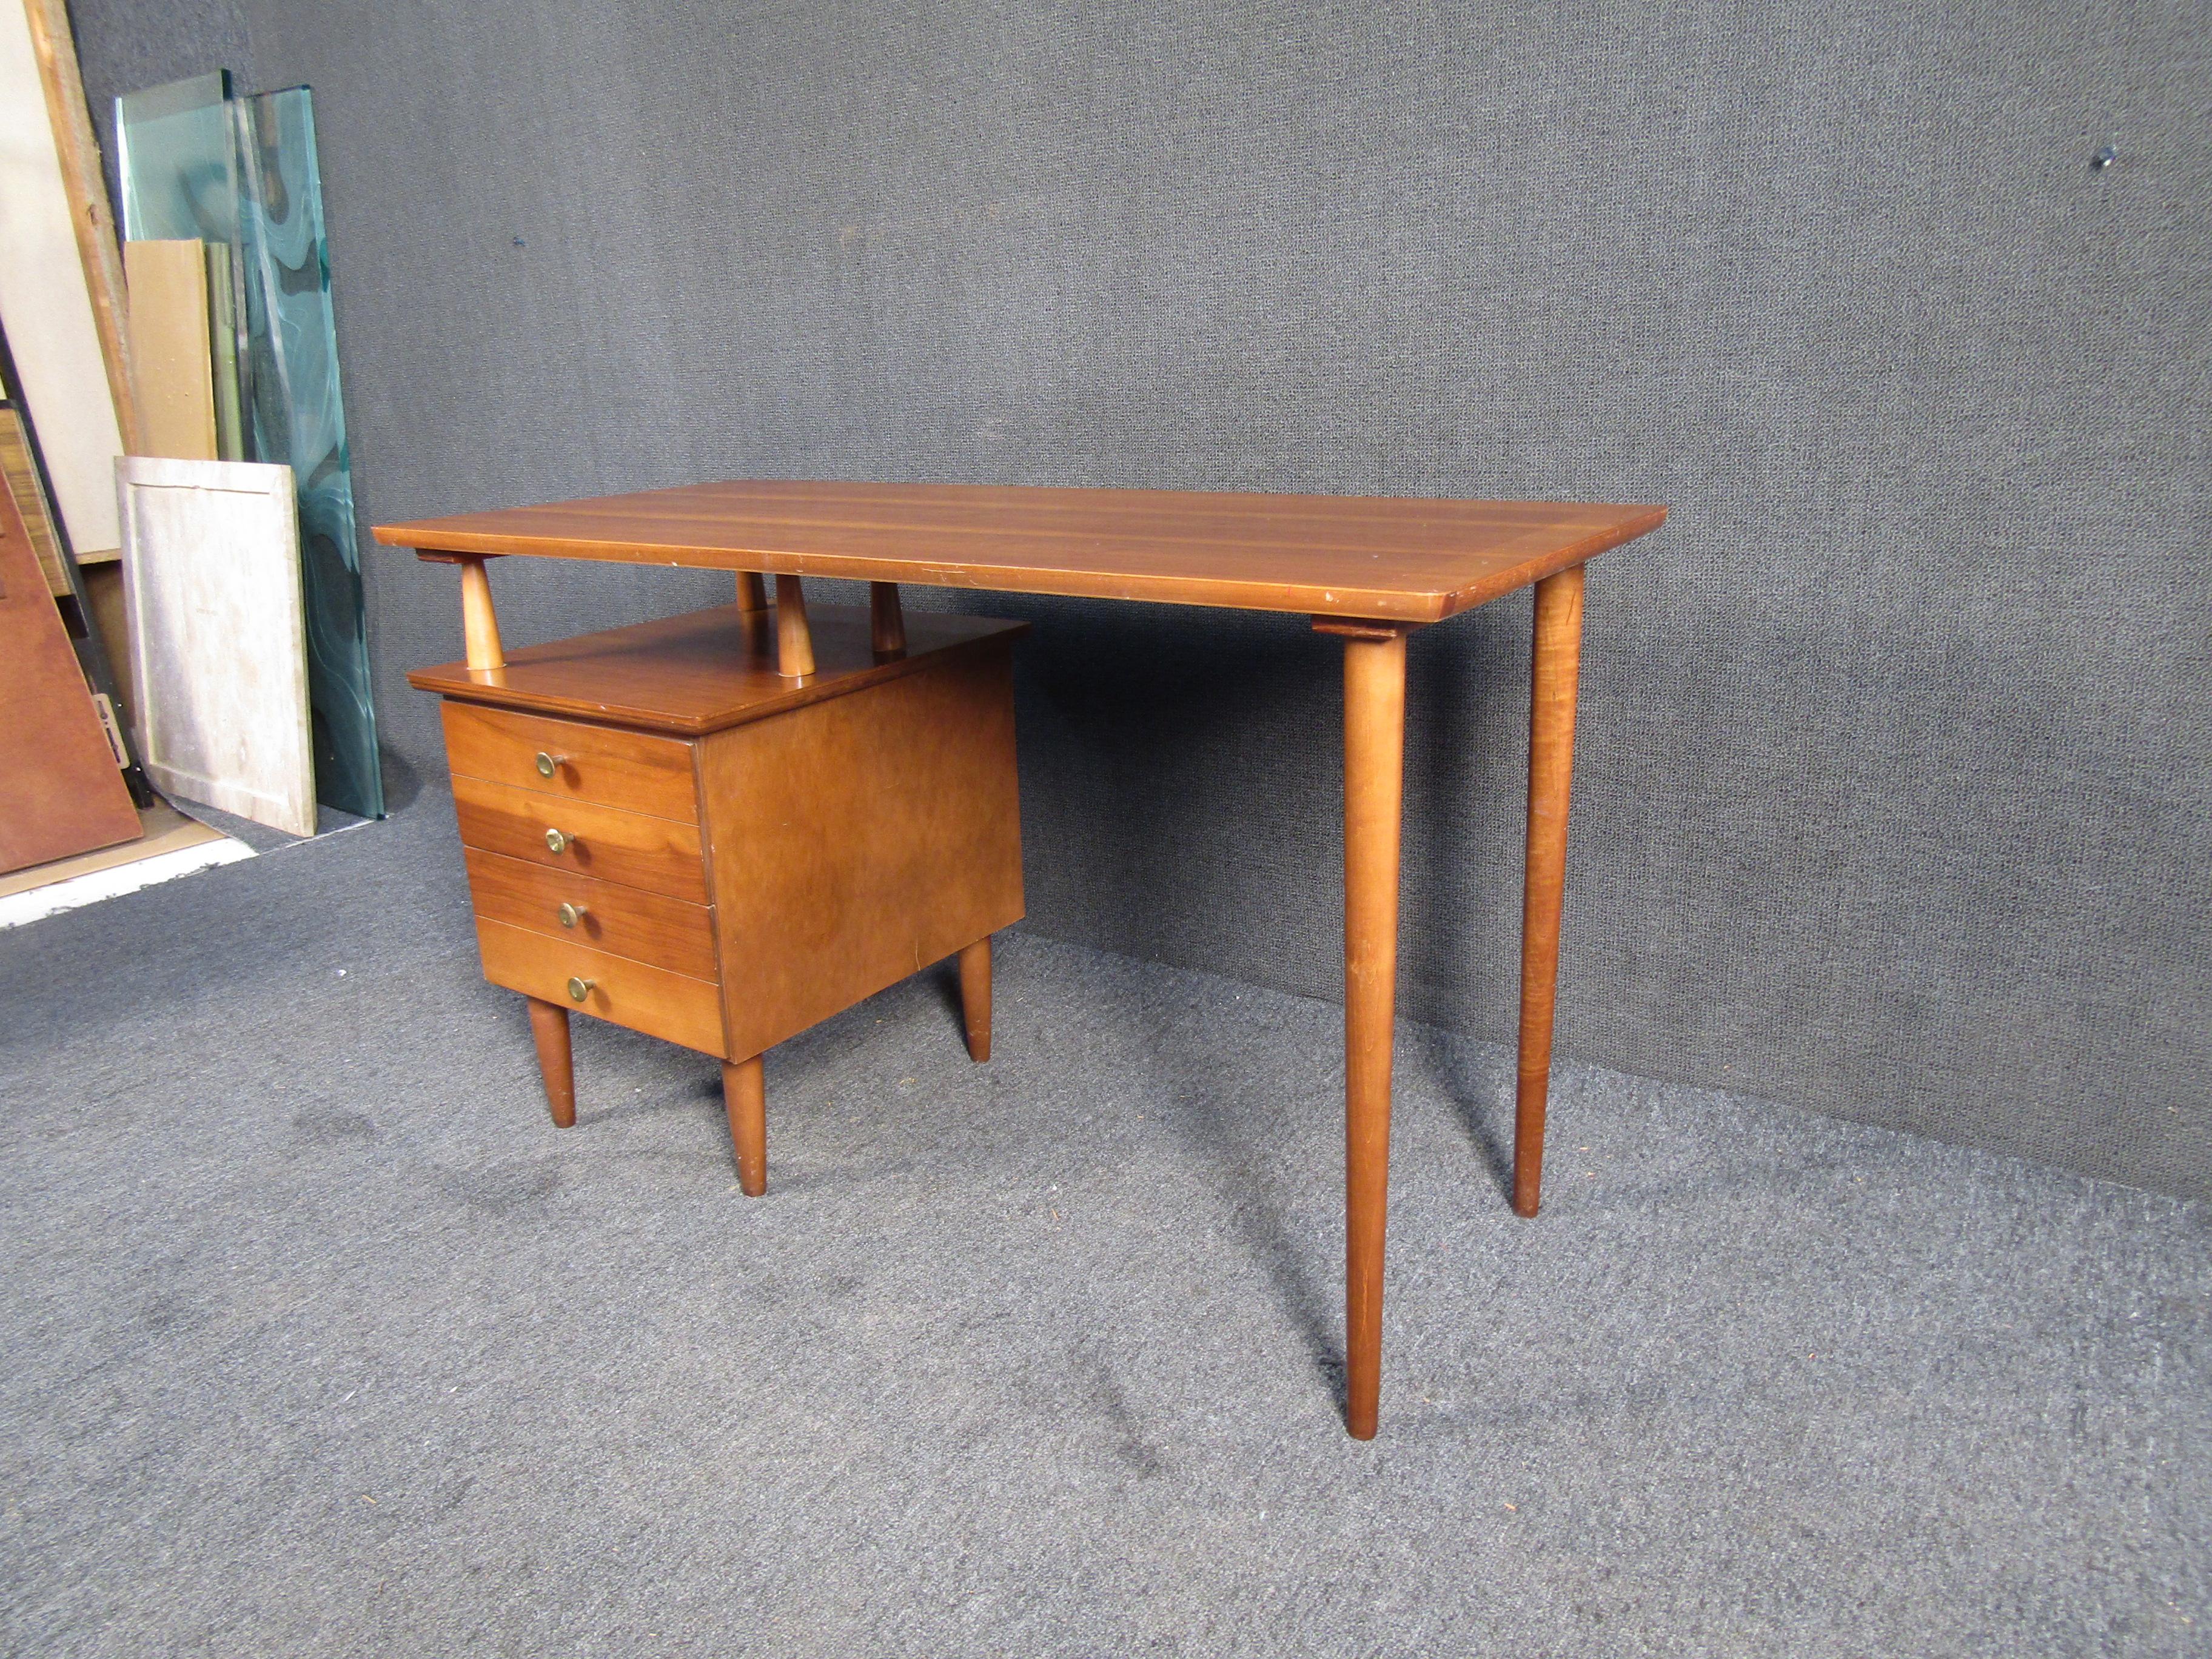 Vintage modern writing desk featured in rich walnut grain. This desk sits on sleek tapered legs and has two spacious drawers. This would be a perfect addition to any creative space.

Please confirm the item location (NY or NJ).